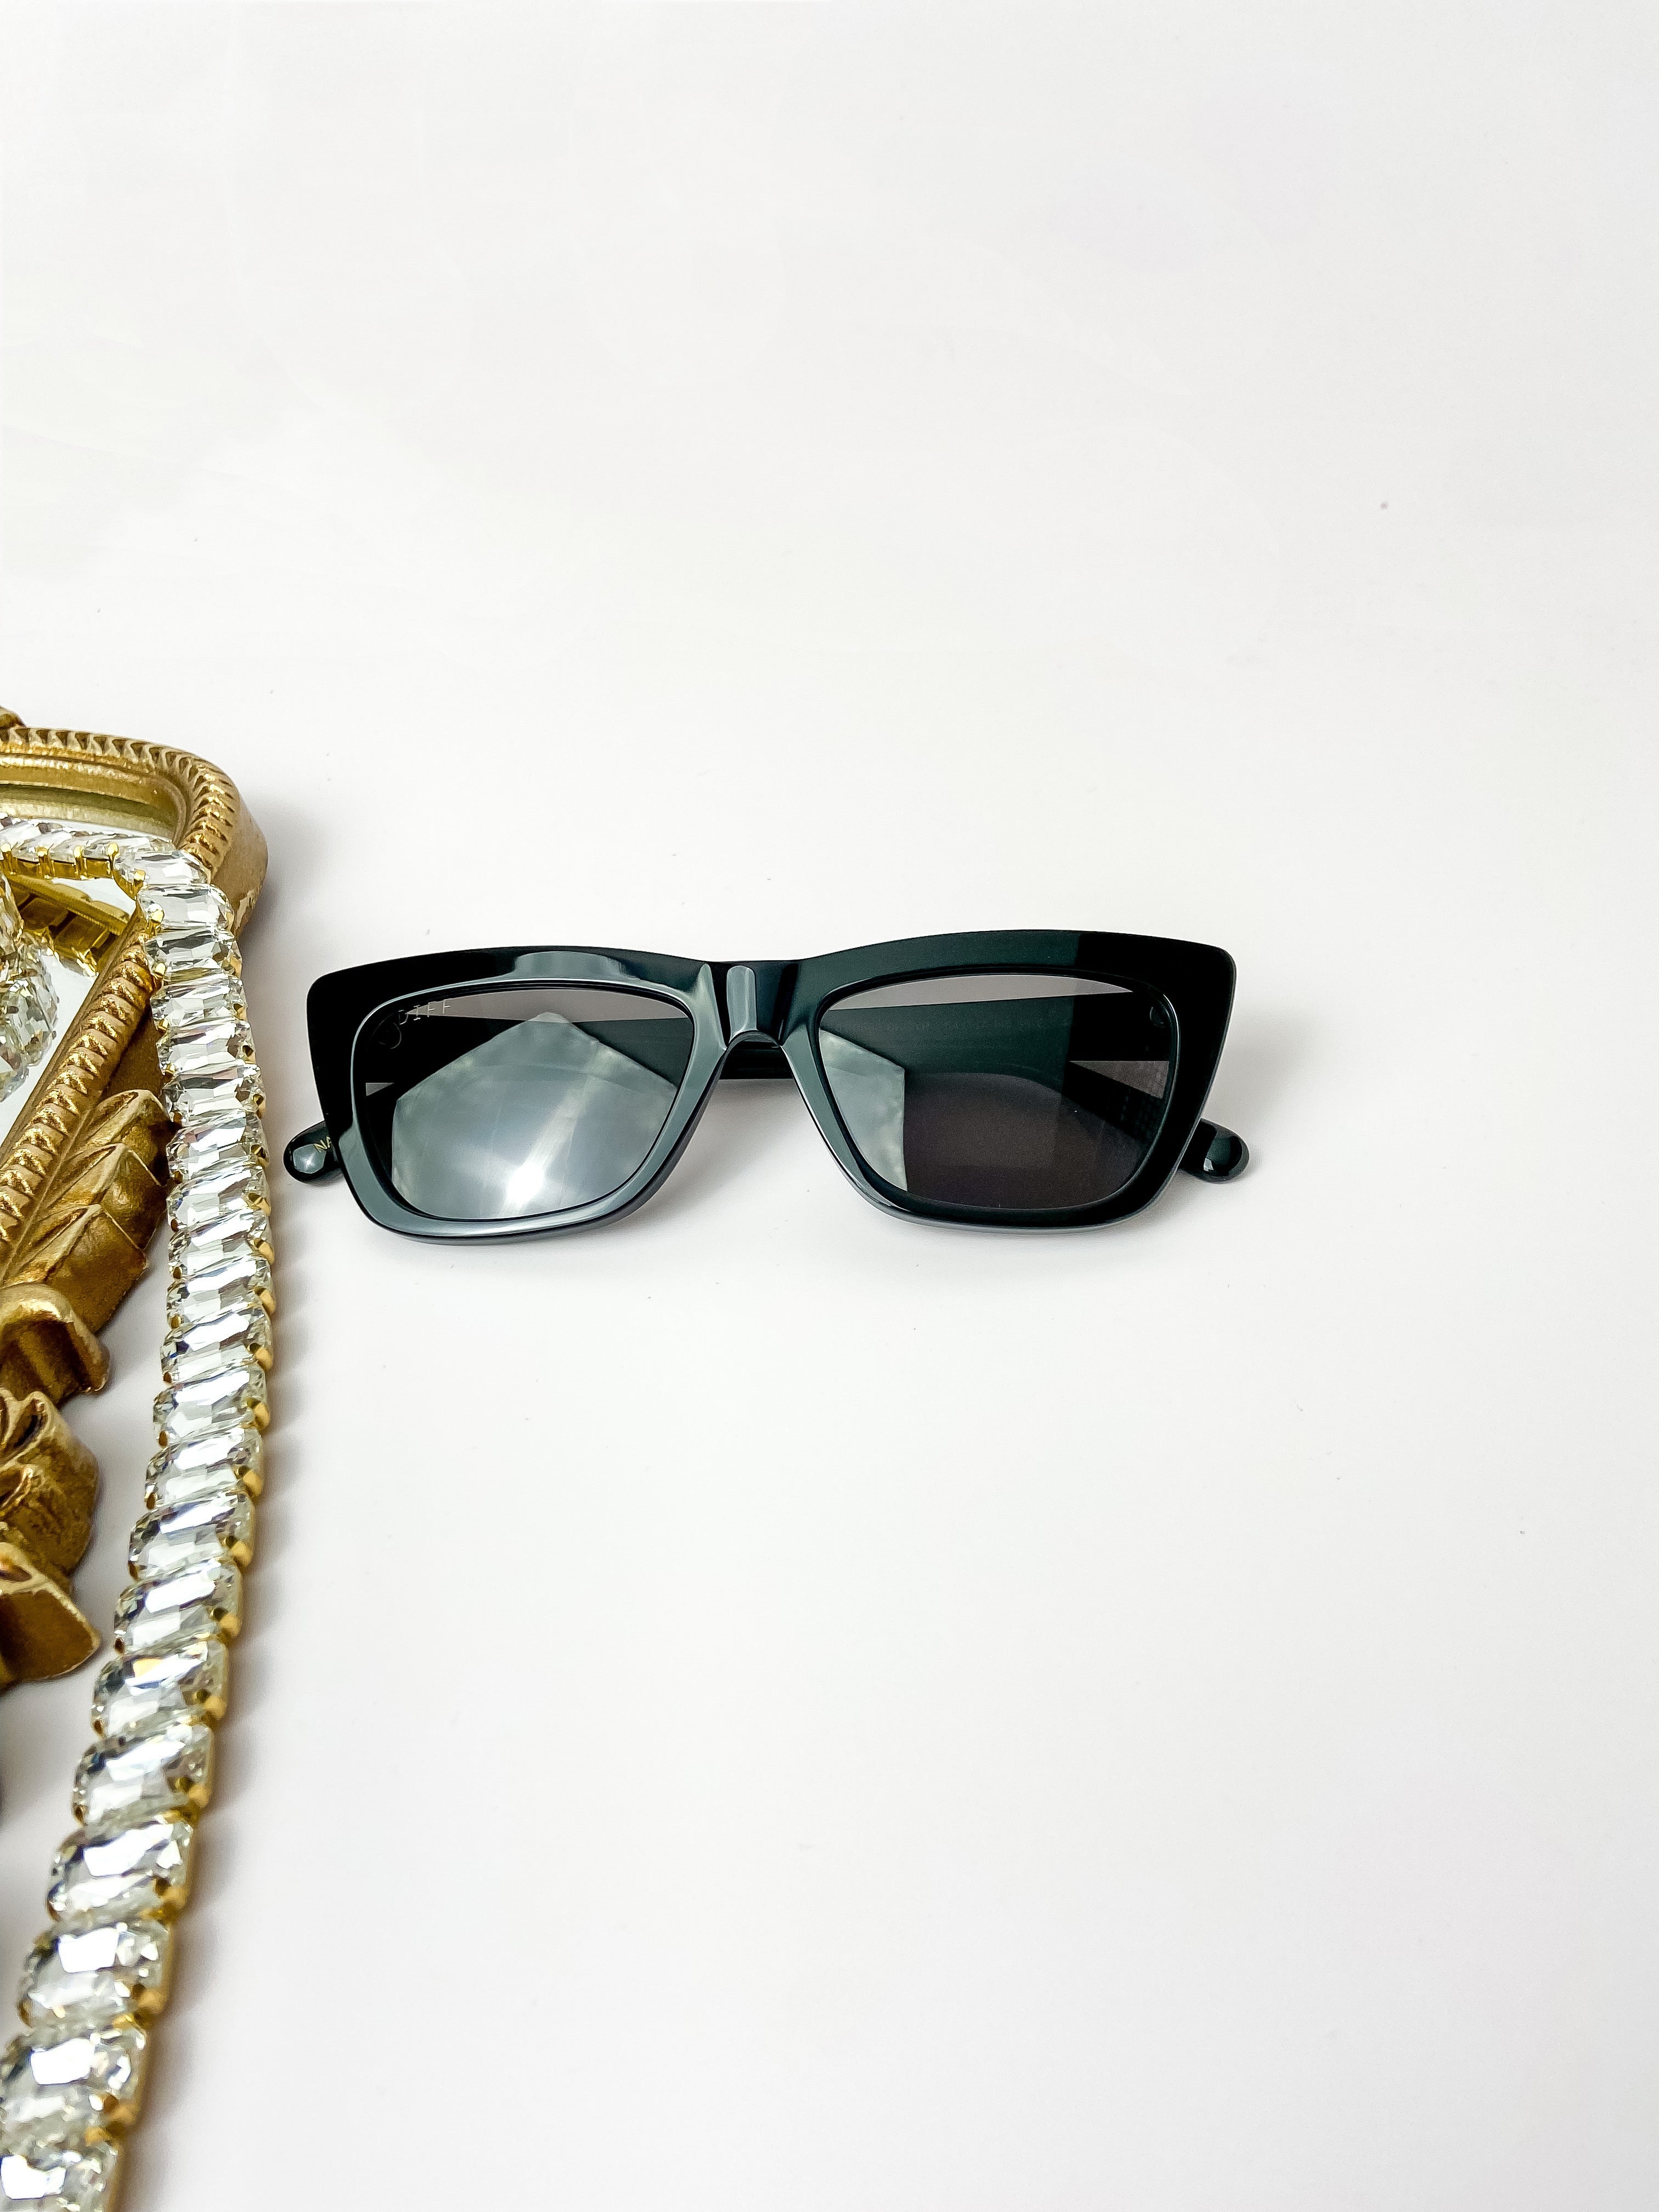 DIFF | Natasha Grey Lens Sunglasses in Black - Giddy Up Glamour Boutique